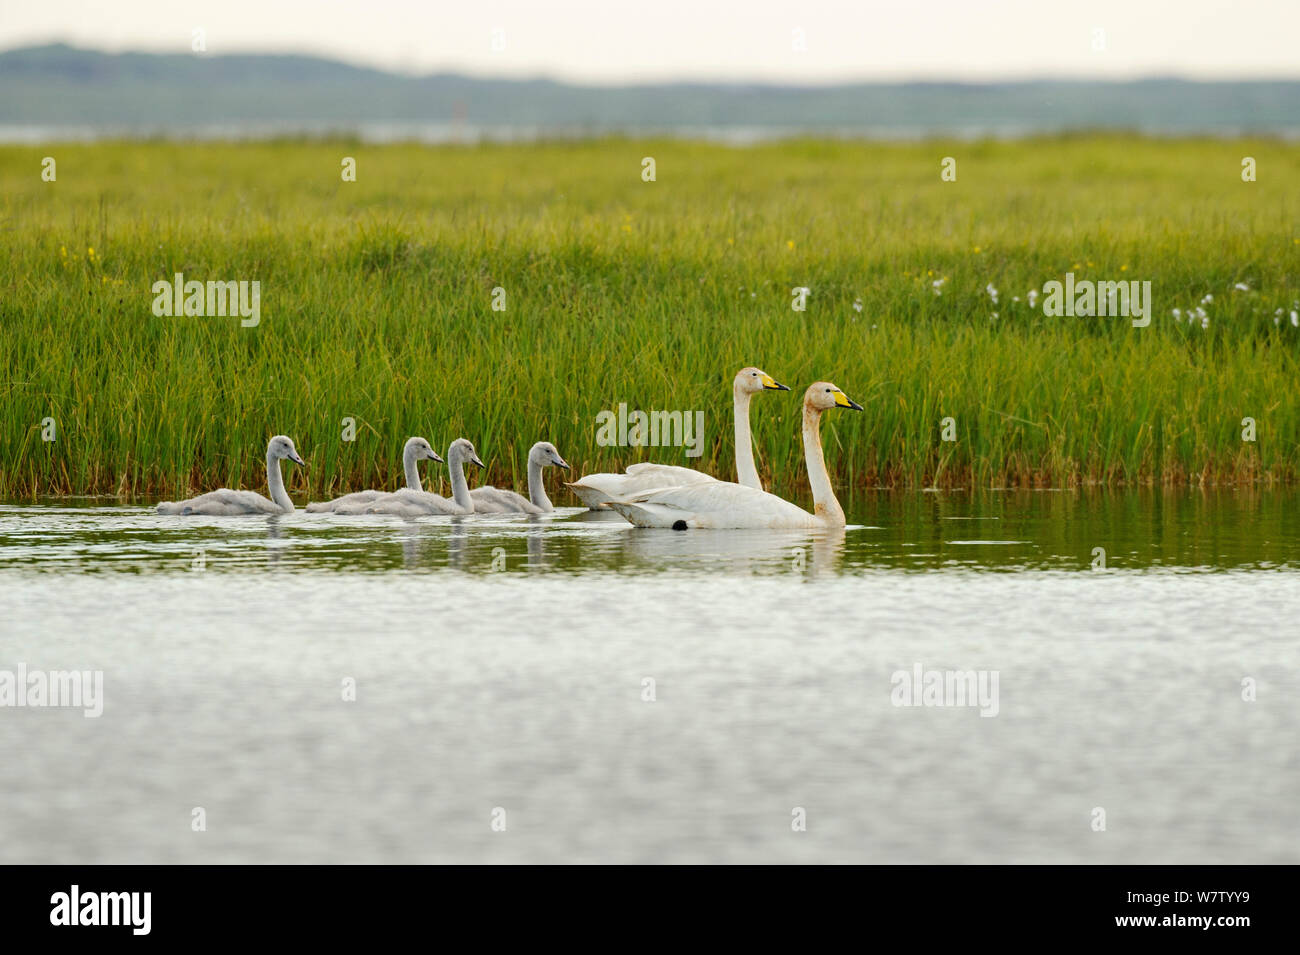 Two Whooper swans (Cygnus cygnus) with four cygnets on water, Iceland, July. Stock Photo